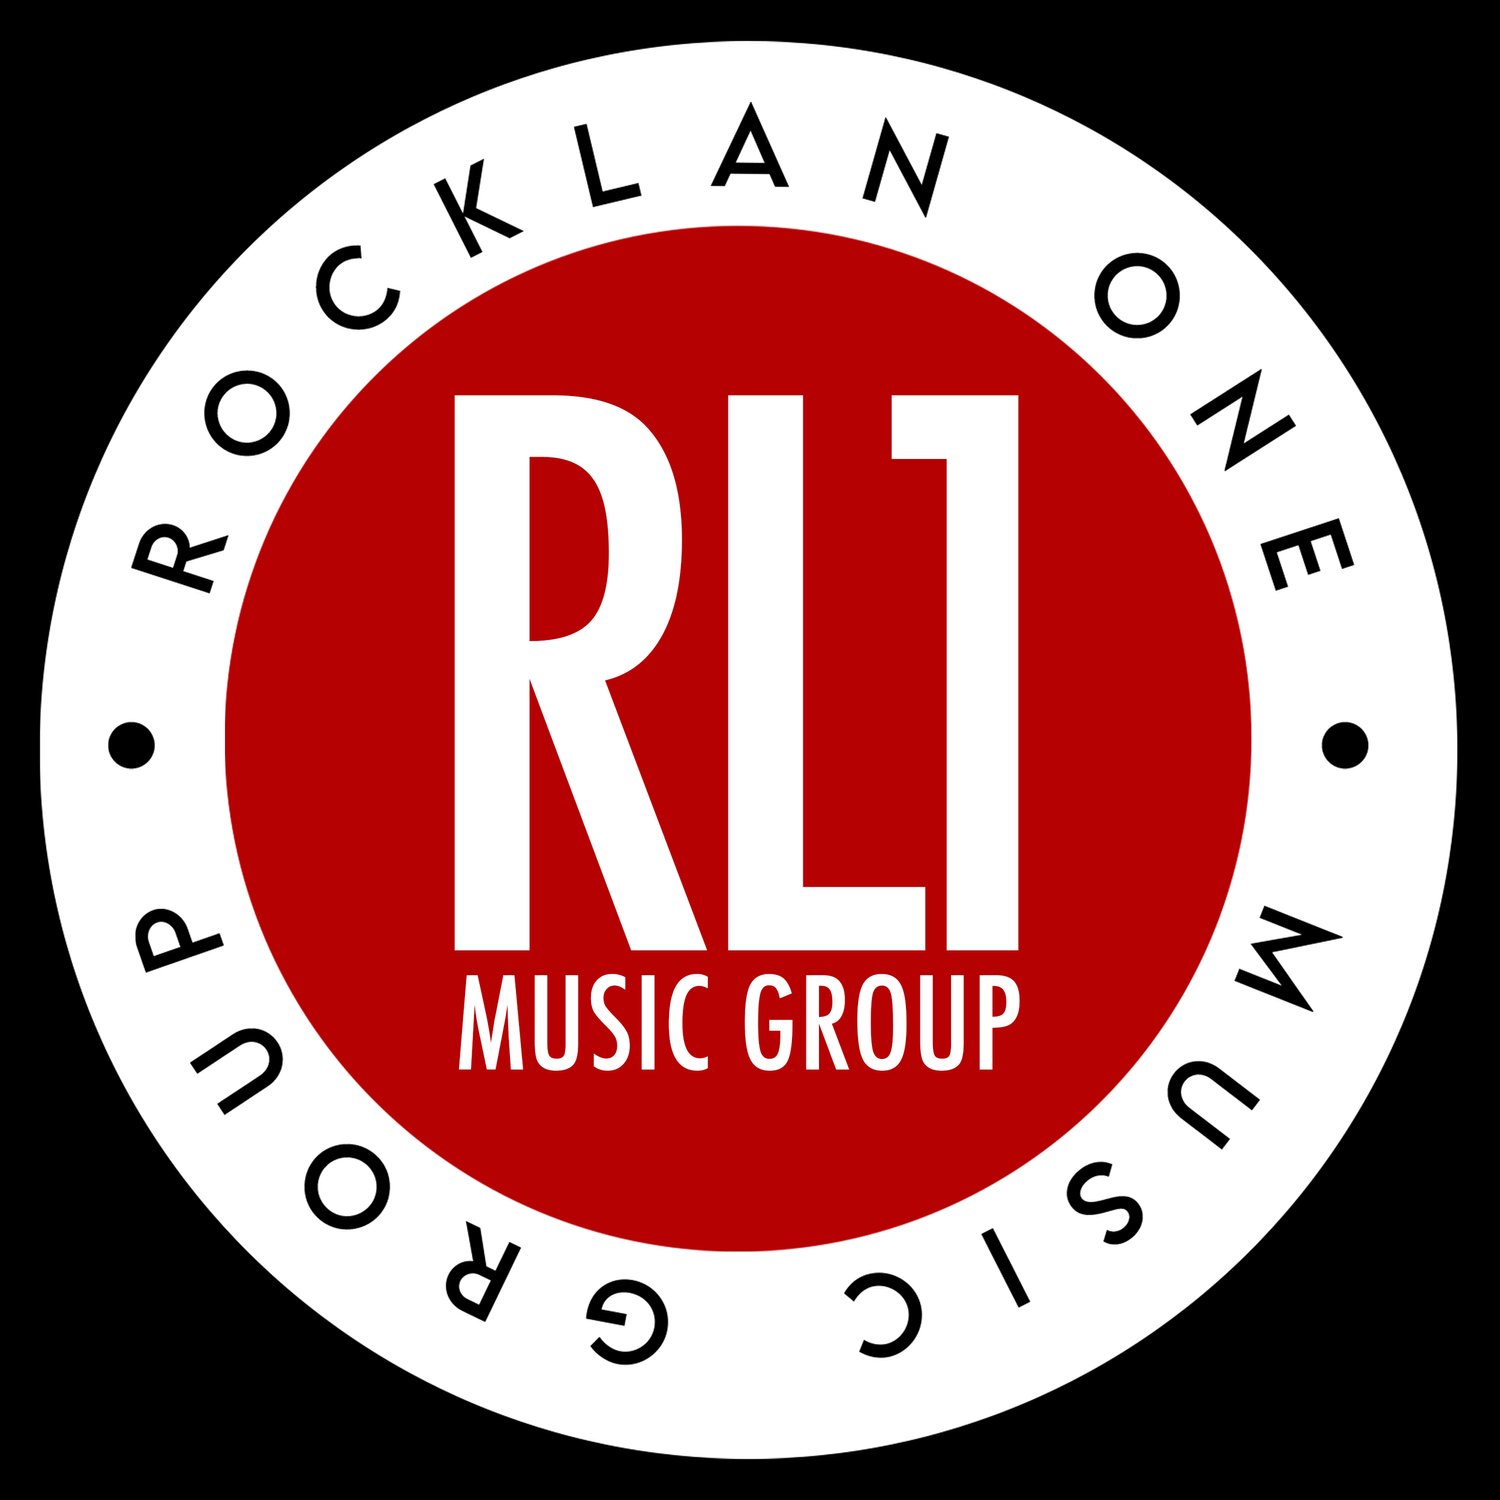 ROCKLAN ONE